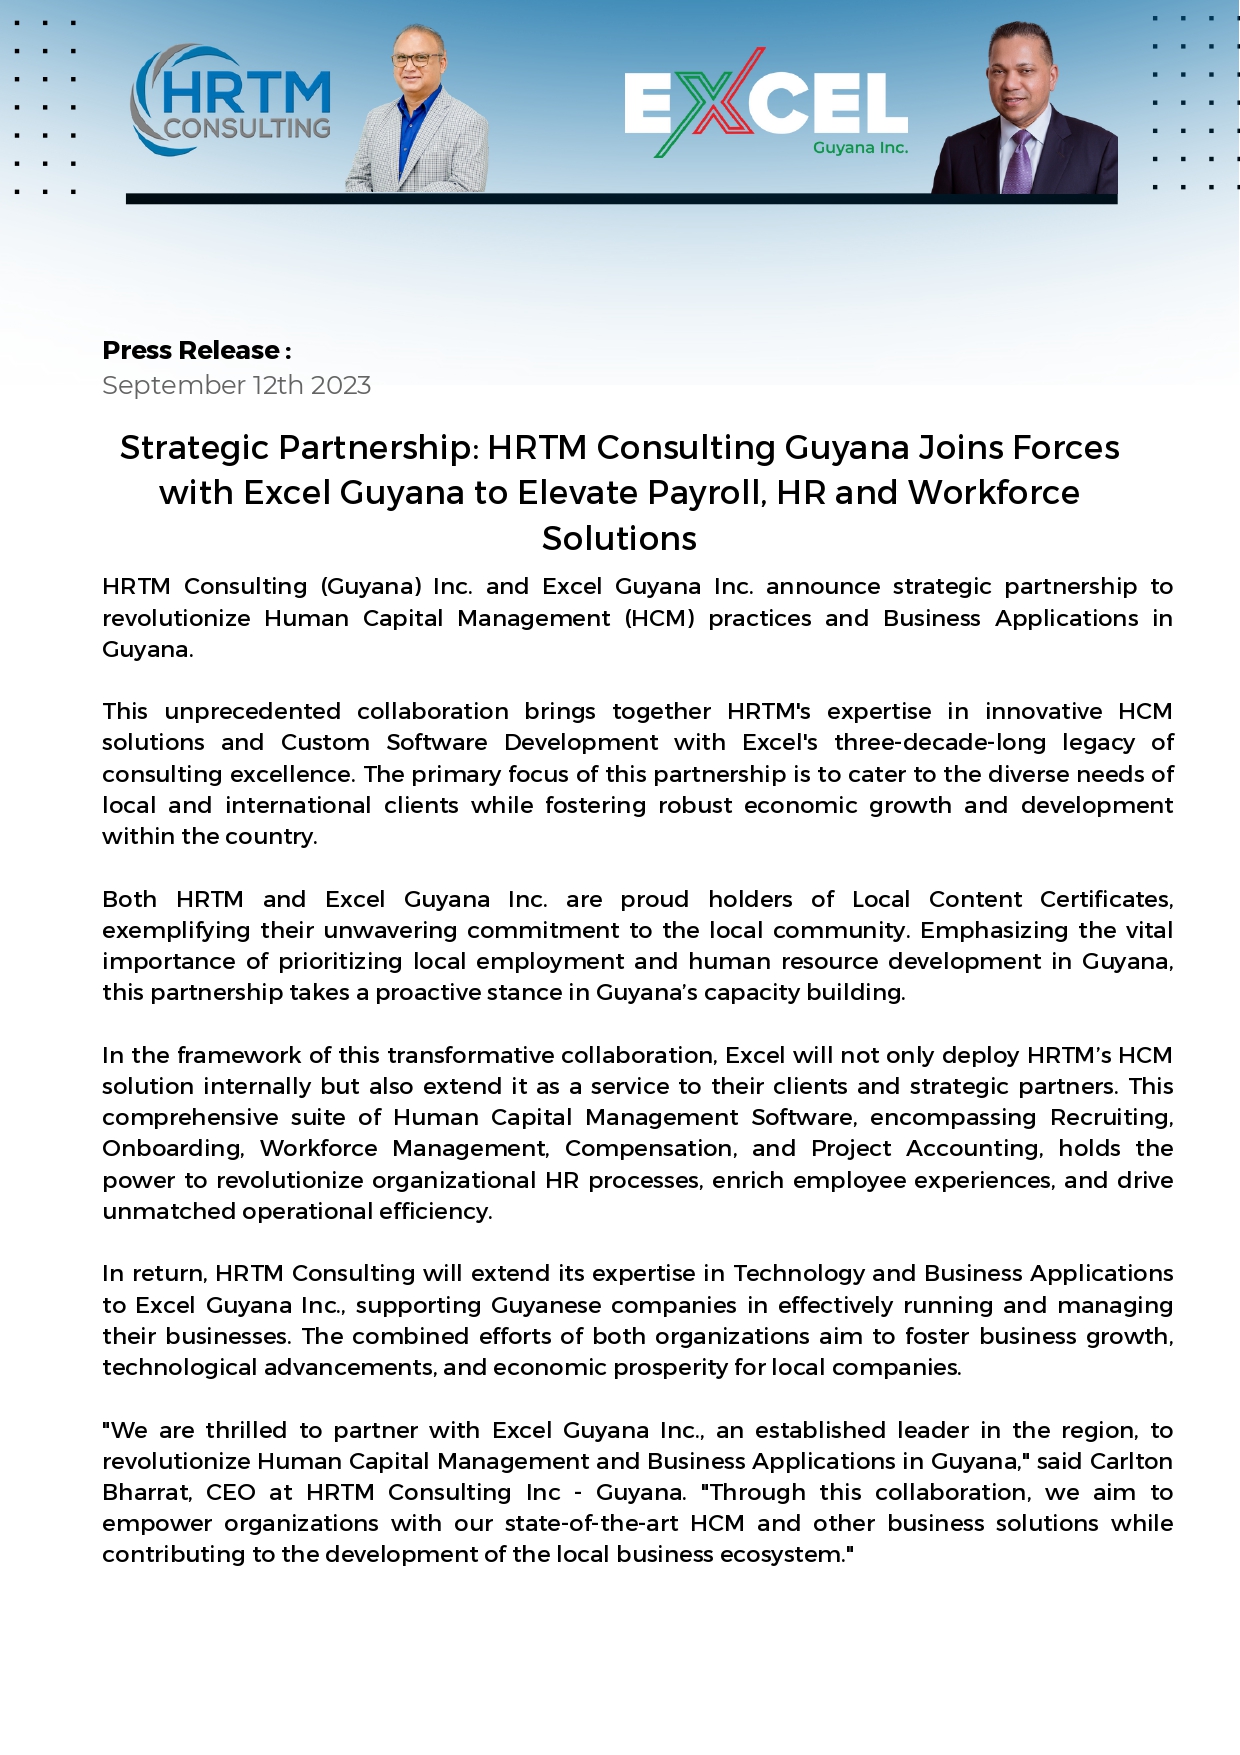 HRTM Consulting partners with Excel Guyana Inc